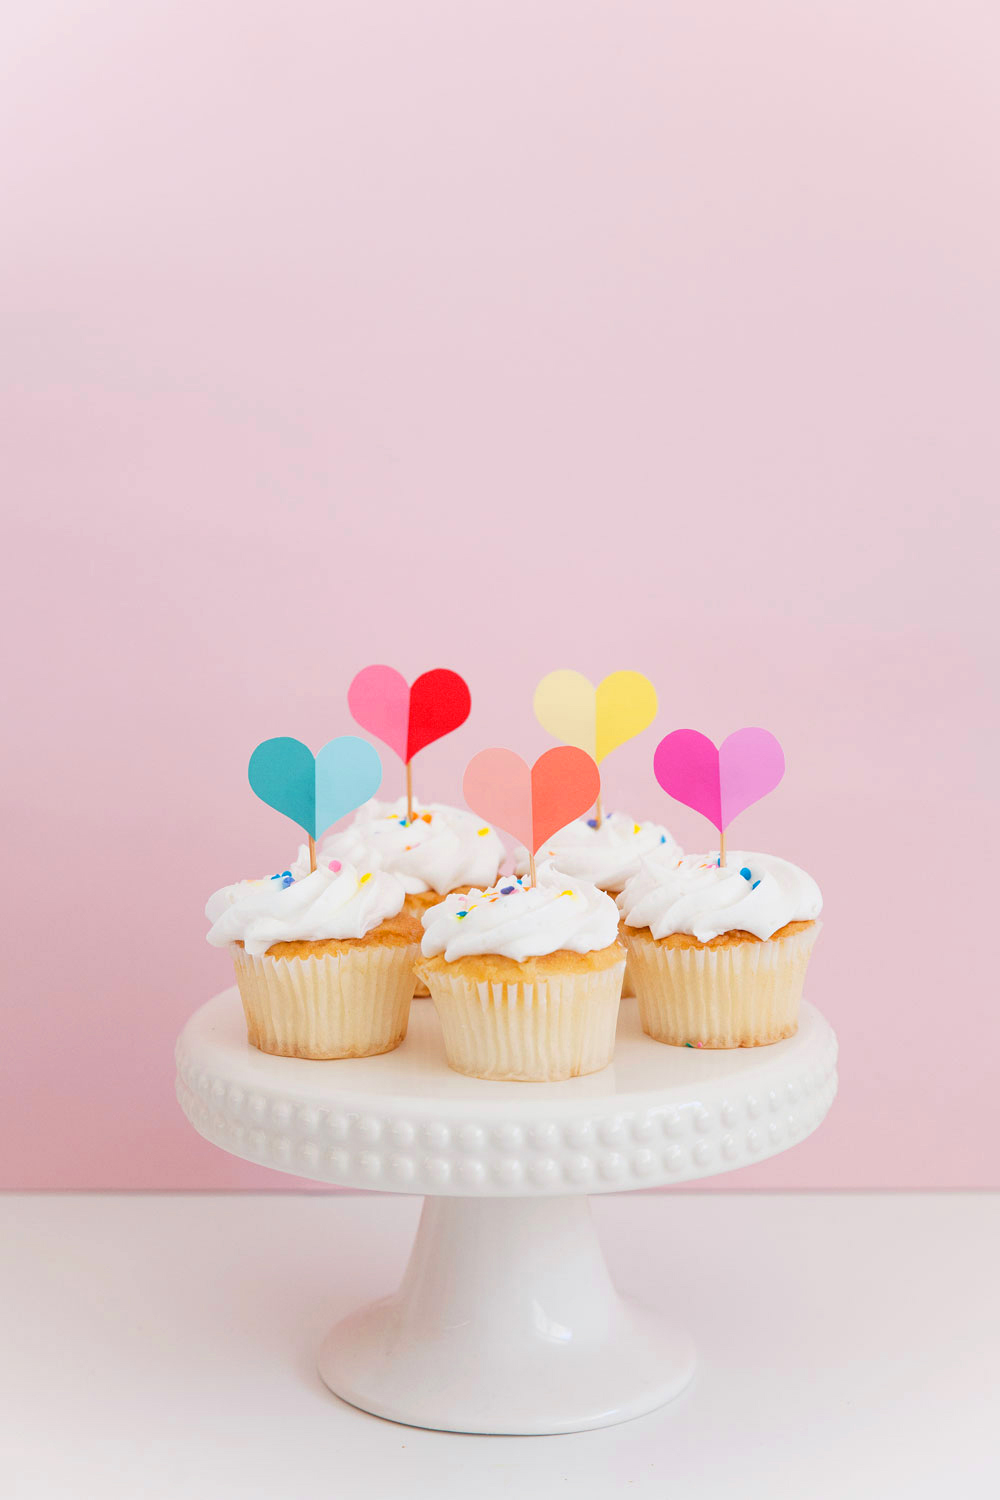 FREE printable heart cupcake toppers | TELL LOVE AND PARTY Valentine's day is coming up and these are perfect for class parties, office treats or just for friends! Either way don't leave those cupcakes plain and boring! -DIY -CAKE TOPPERS 